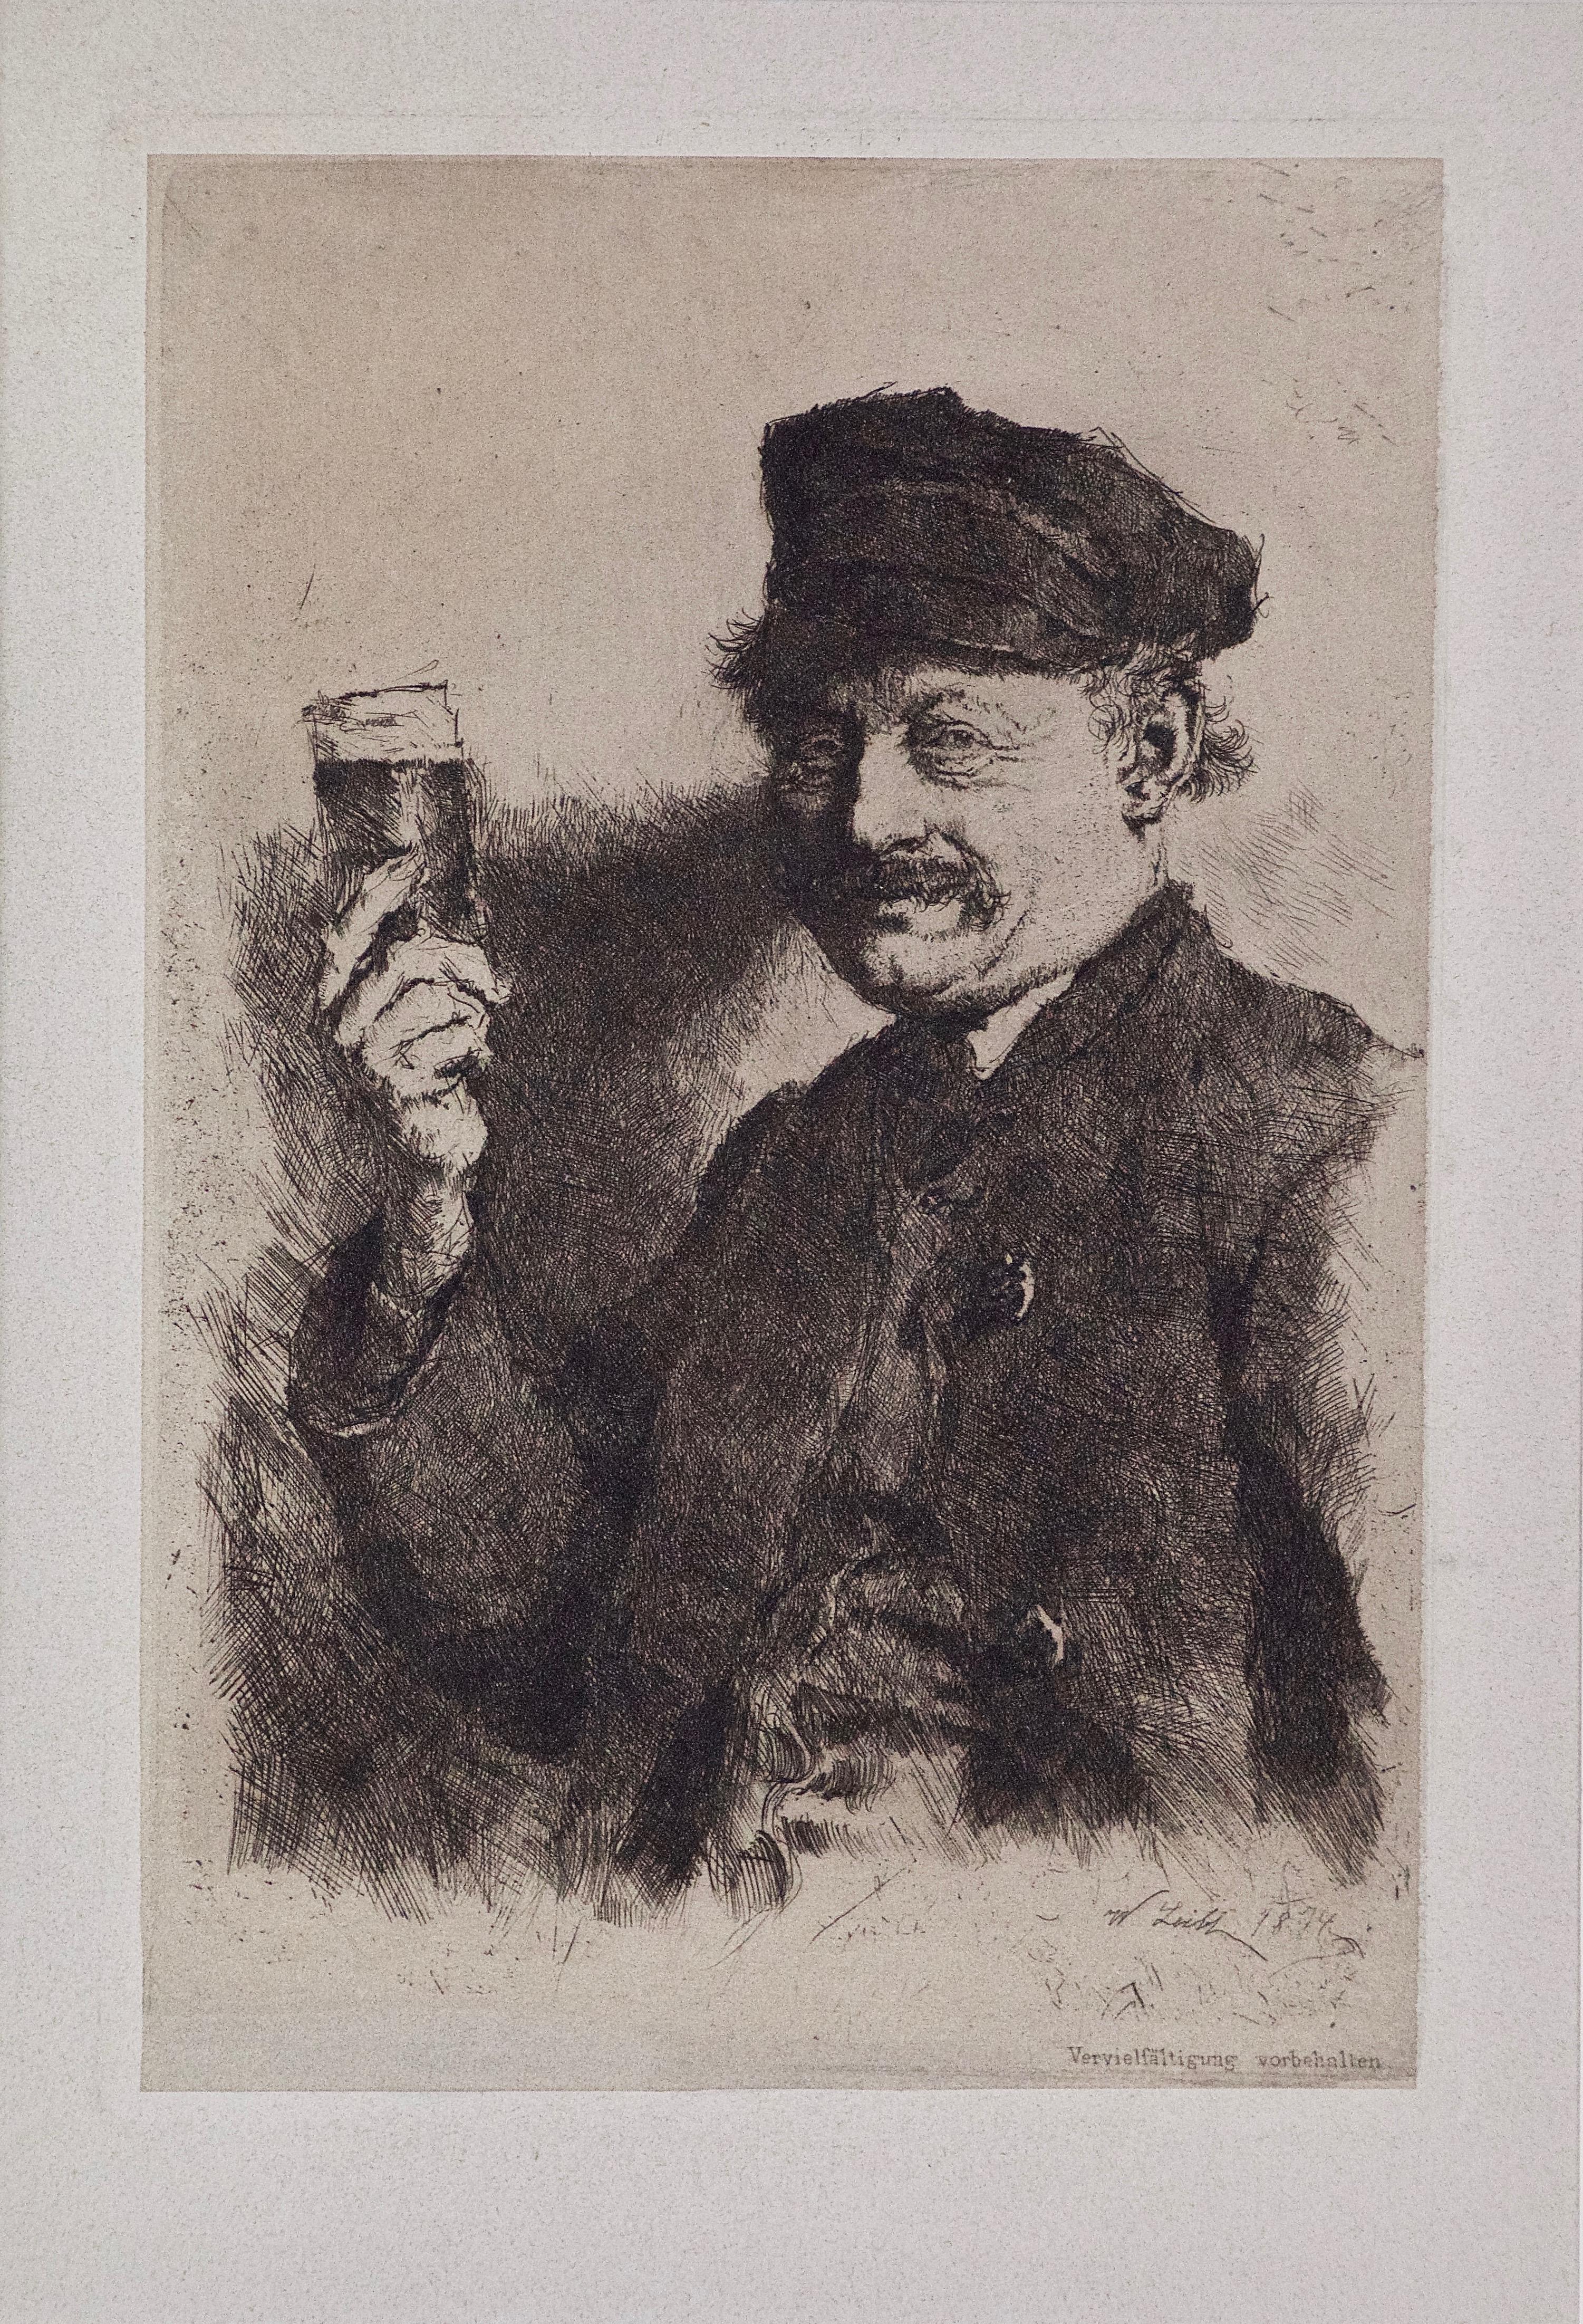 19th Century Etching Der Trinker (The Drinker, Portrait of a Brewer) by Leibl - Print by Wilhelm Maria Hubertus Leibl